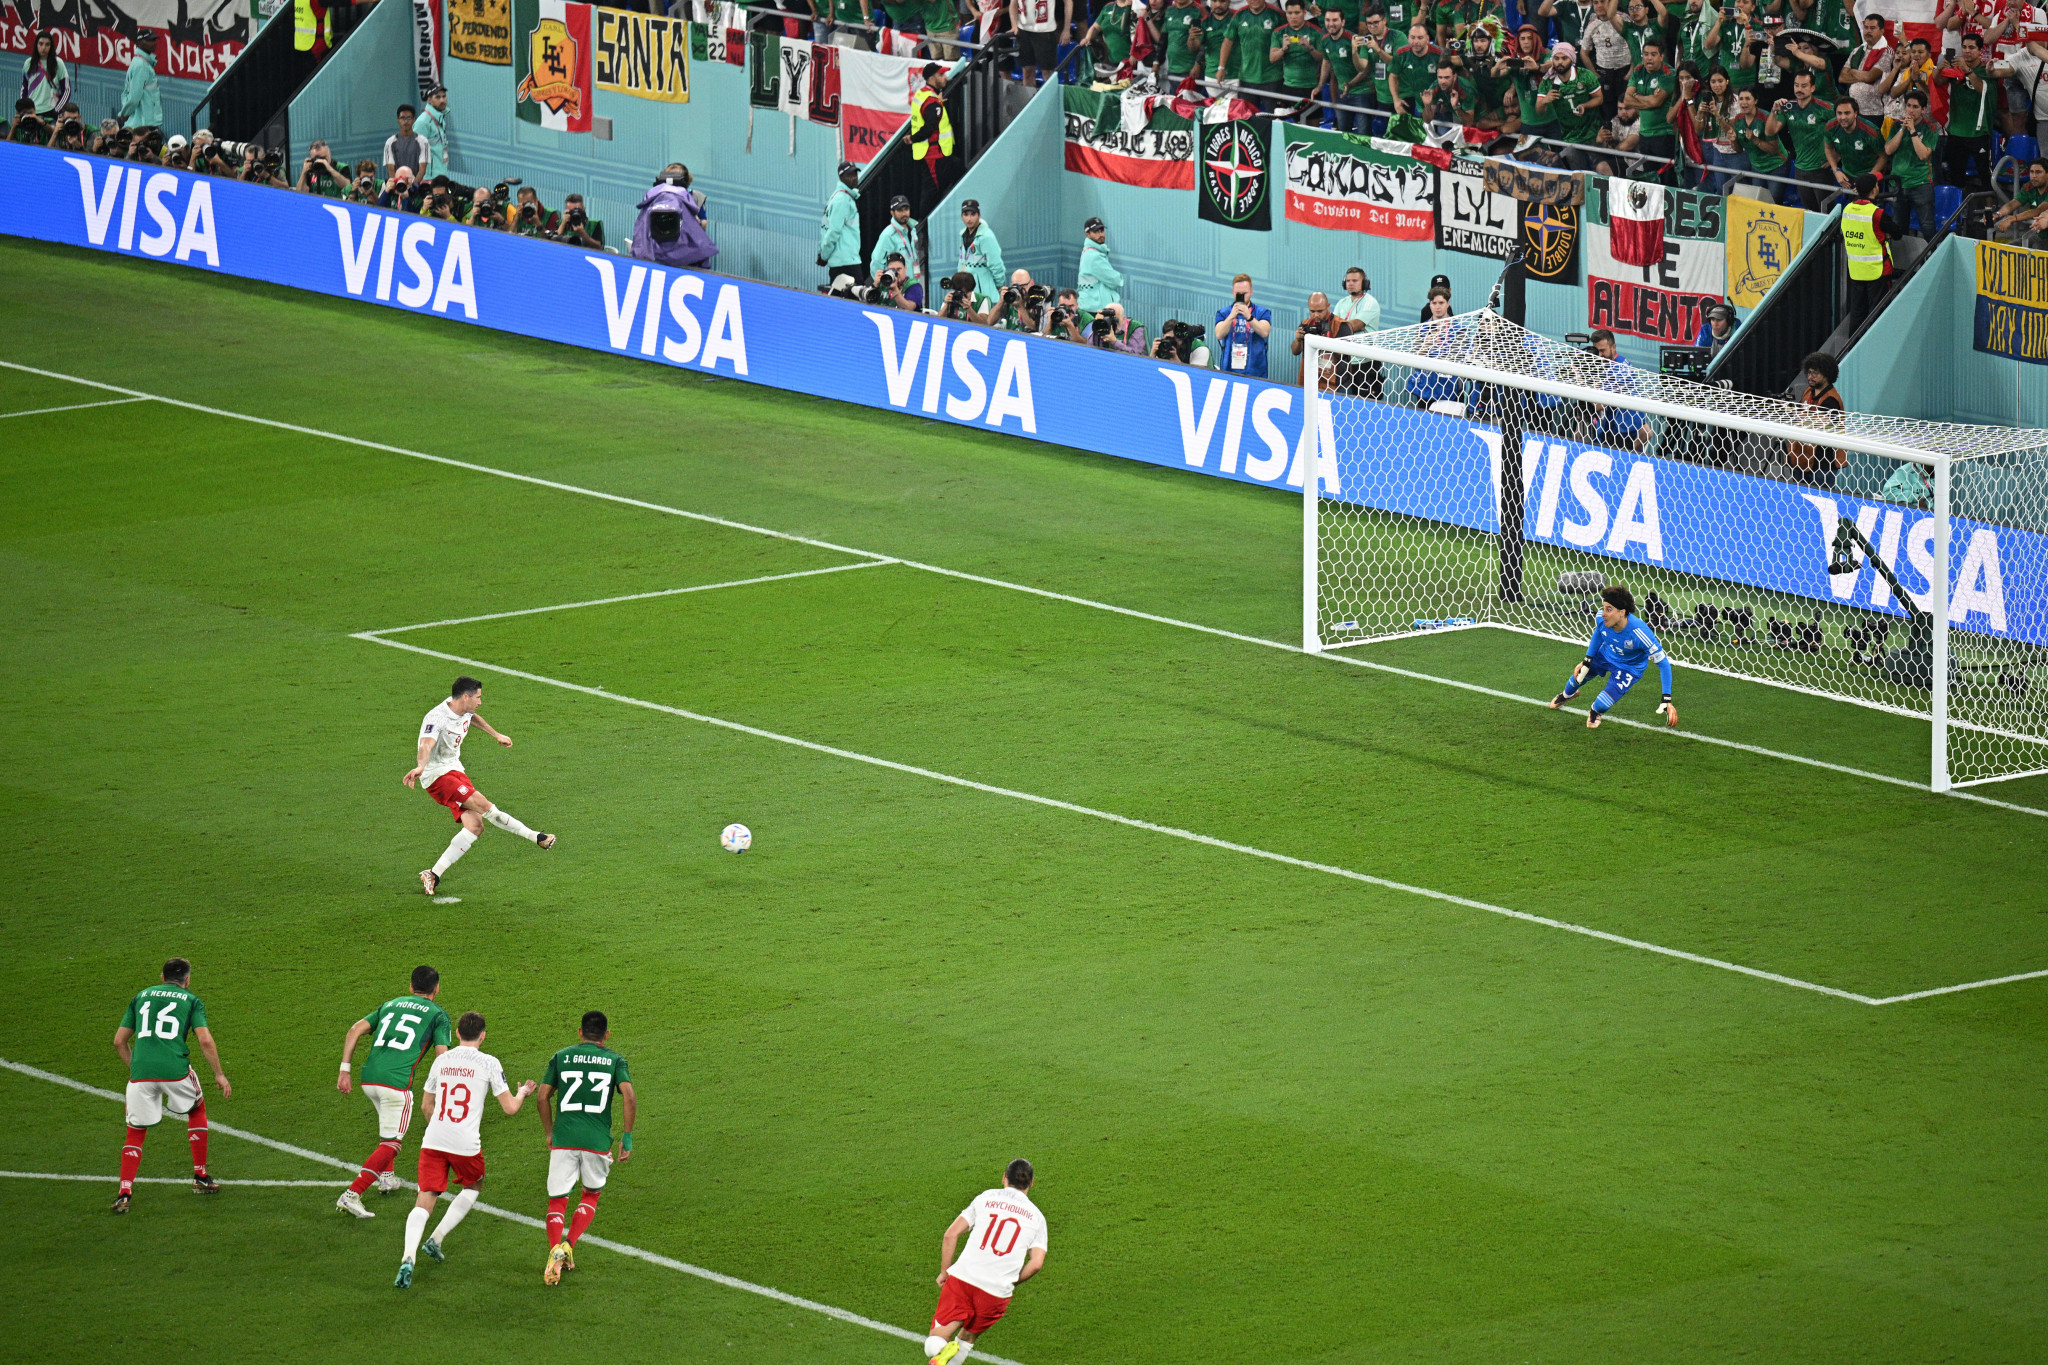 Poland and Mexico also drew 0-0 as Robert Lewandowski failed to score his first World Cup goal as his penalty was saved by Guillermo Ochoa ©Getty Images